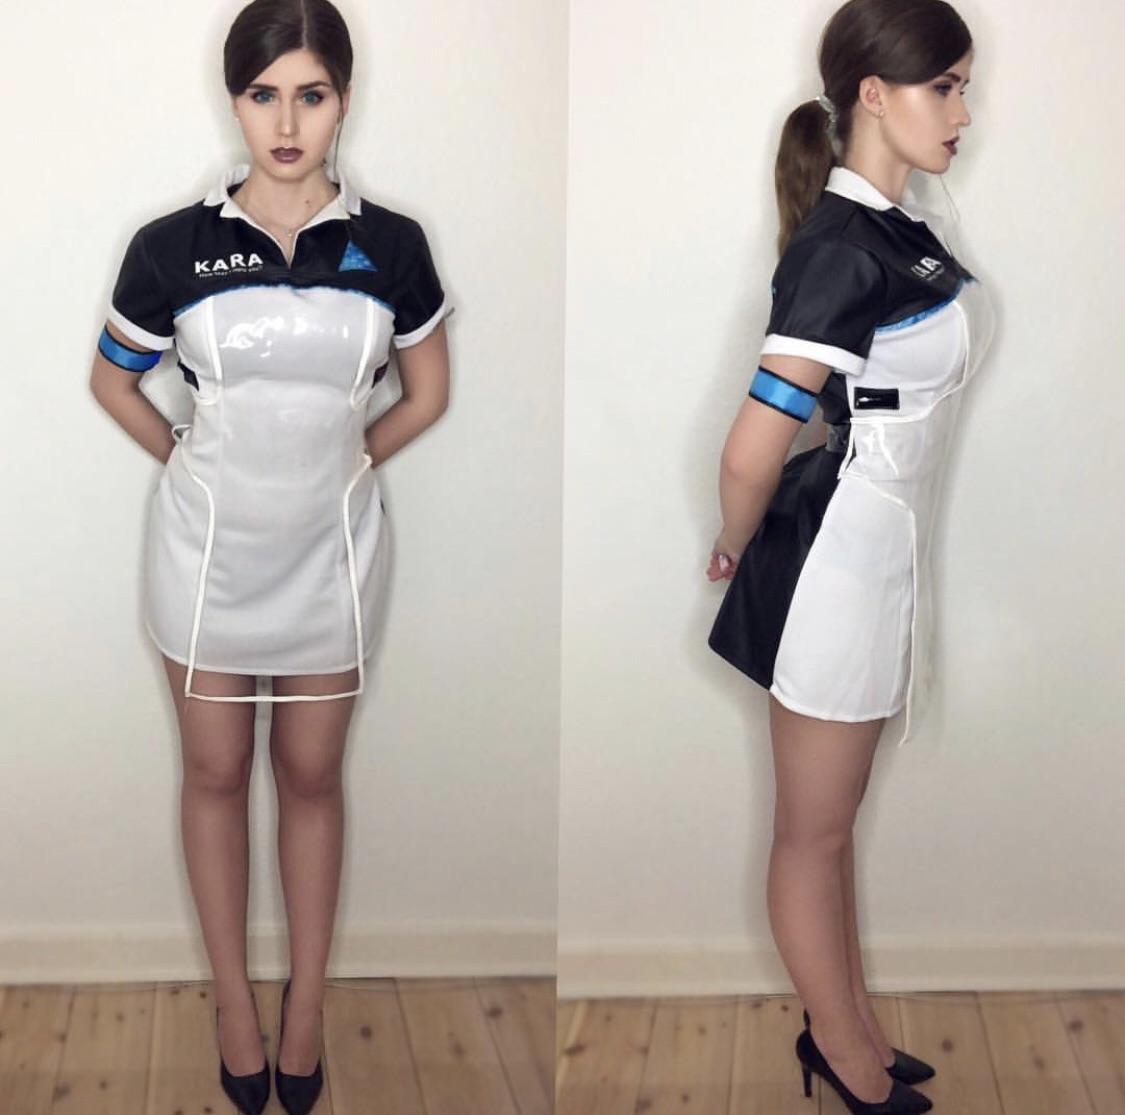 Ax400 Android Kara From Detroit Become Human By 0